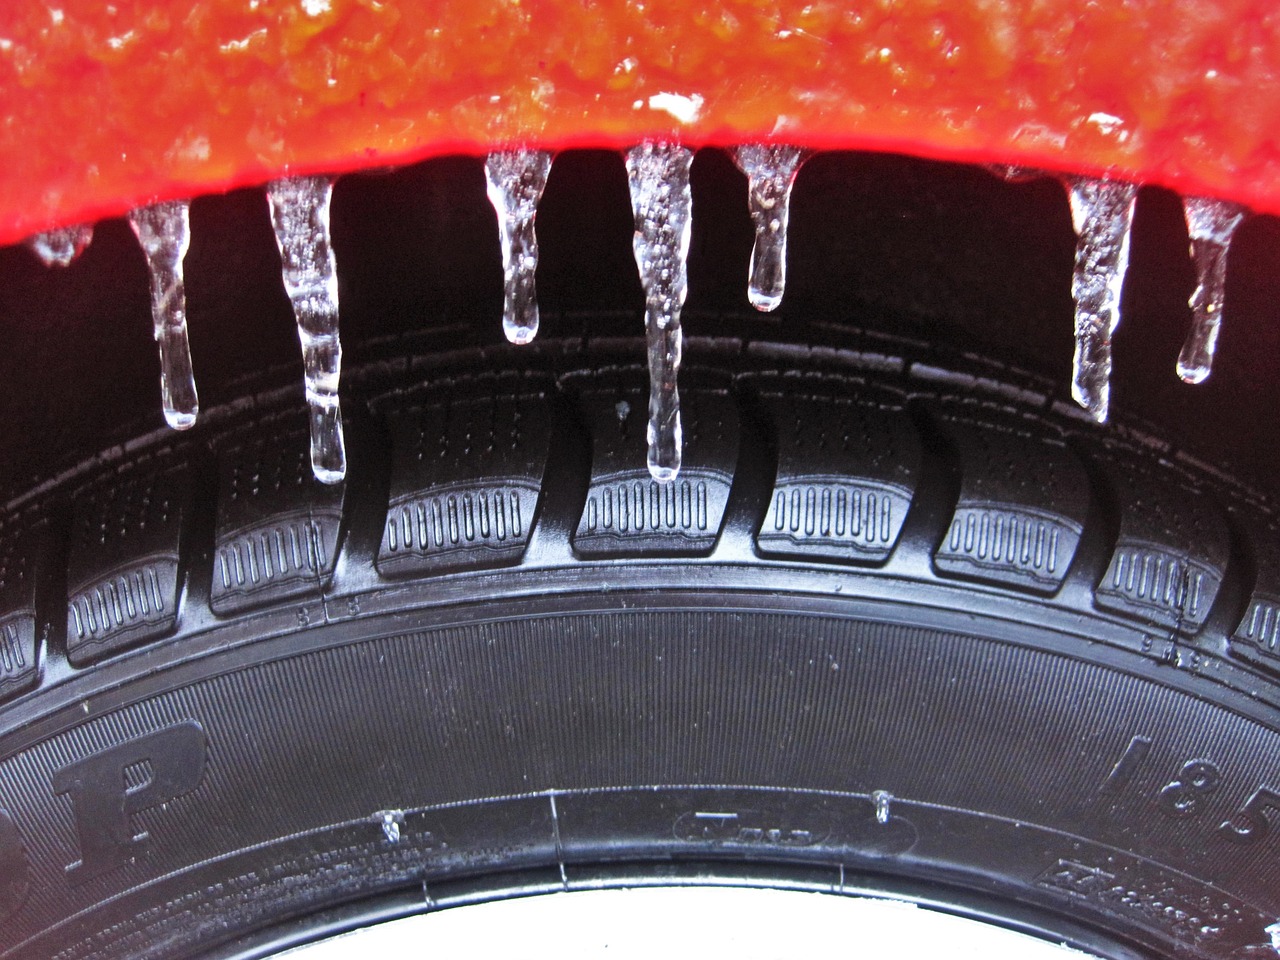 5 Important Tips for Driving Safely in Freezing Rain